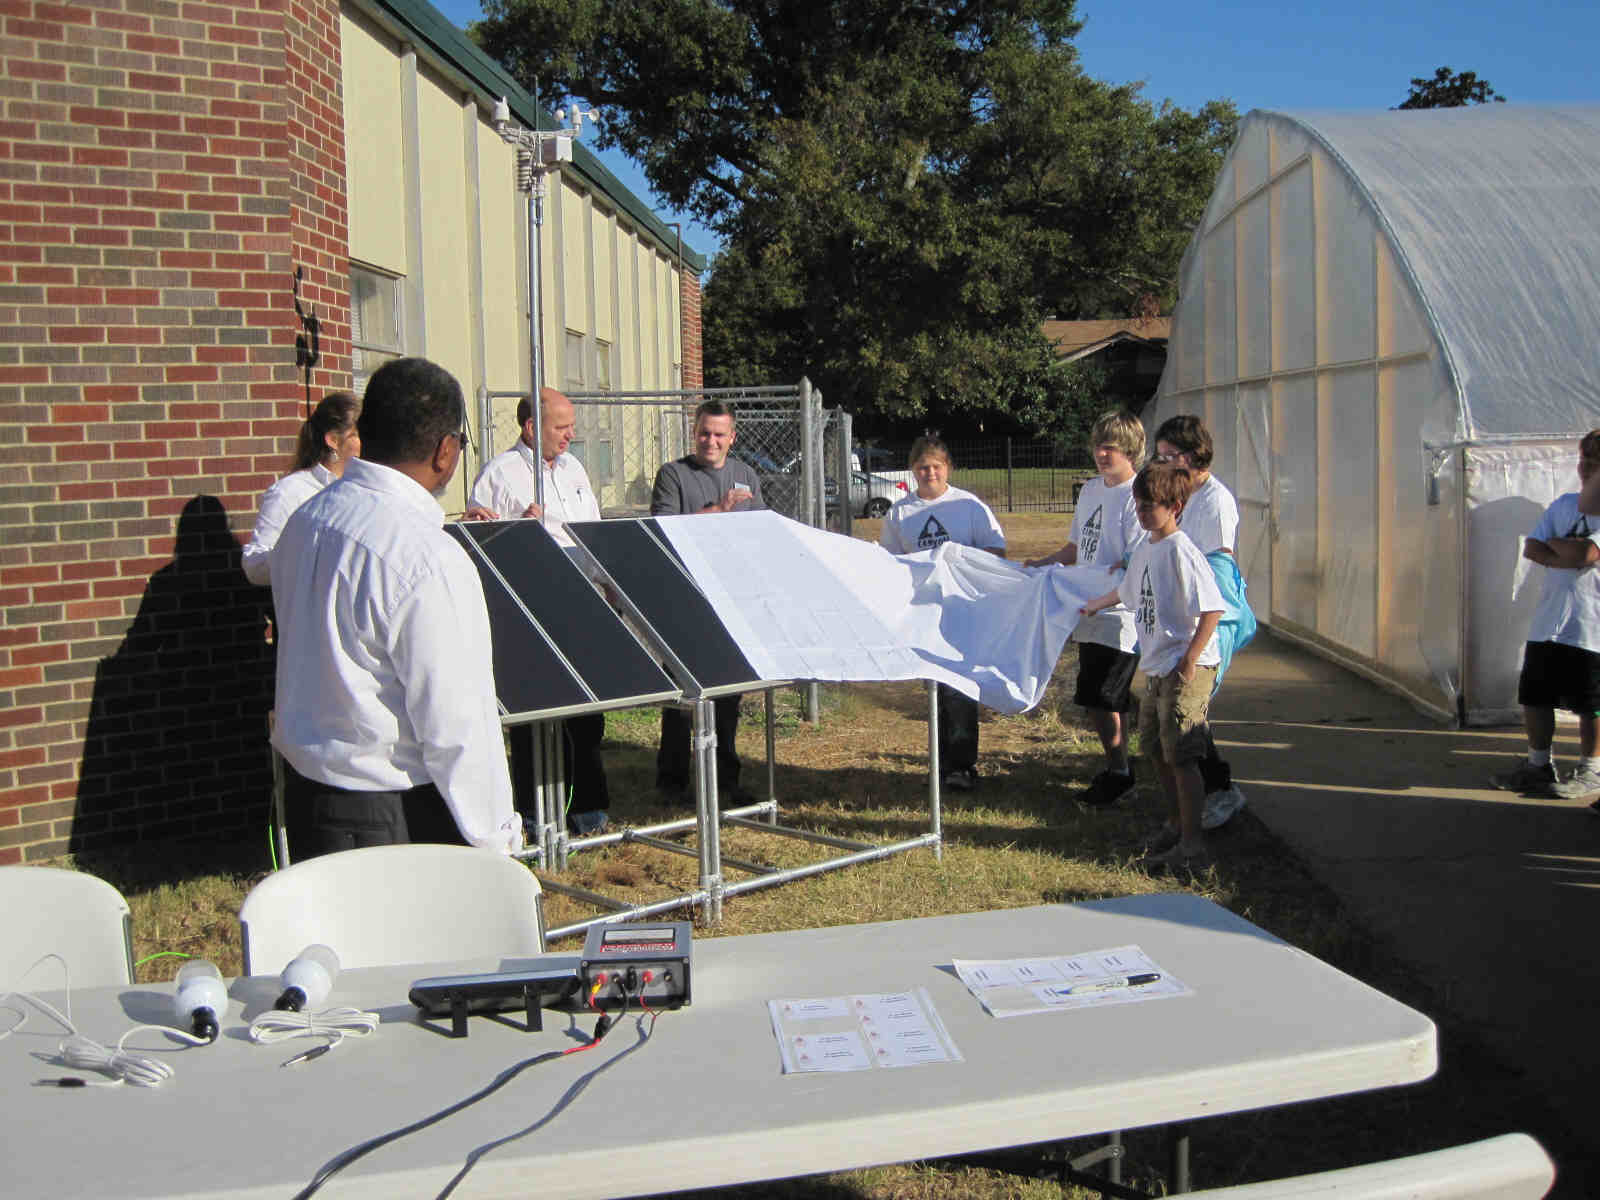 Students and faculity unveil their new solar array while members of MAREH assist.